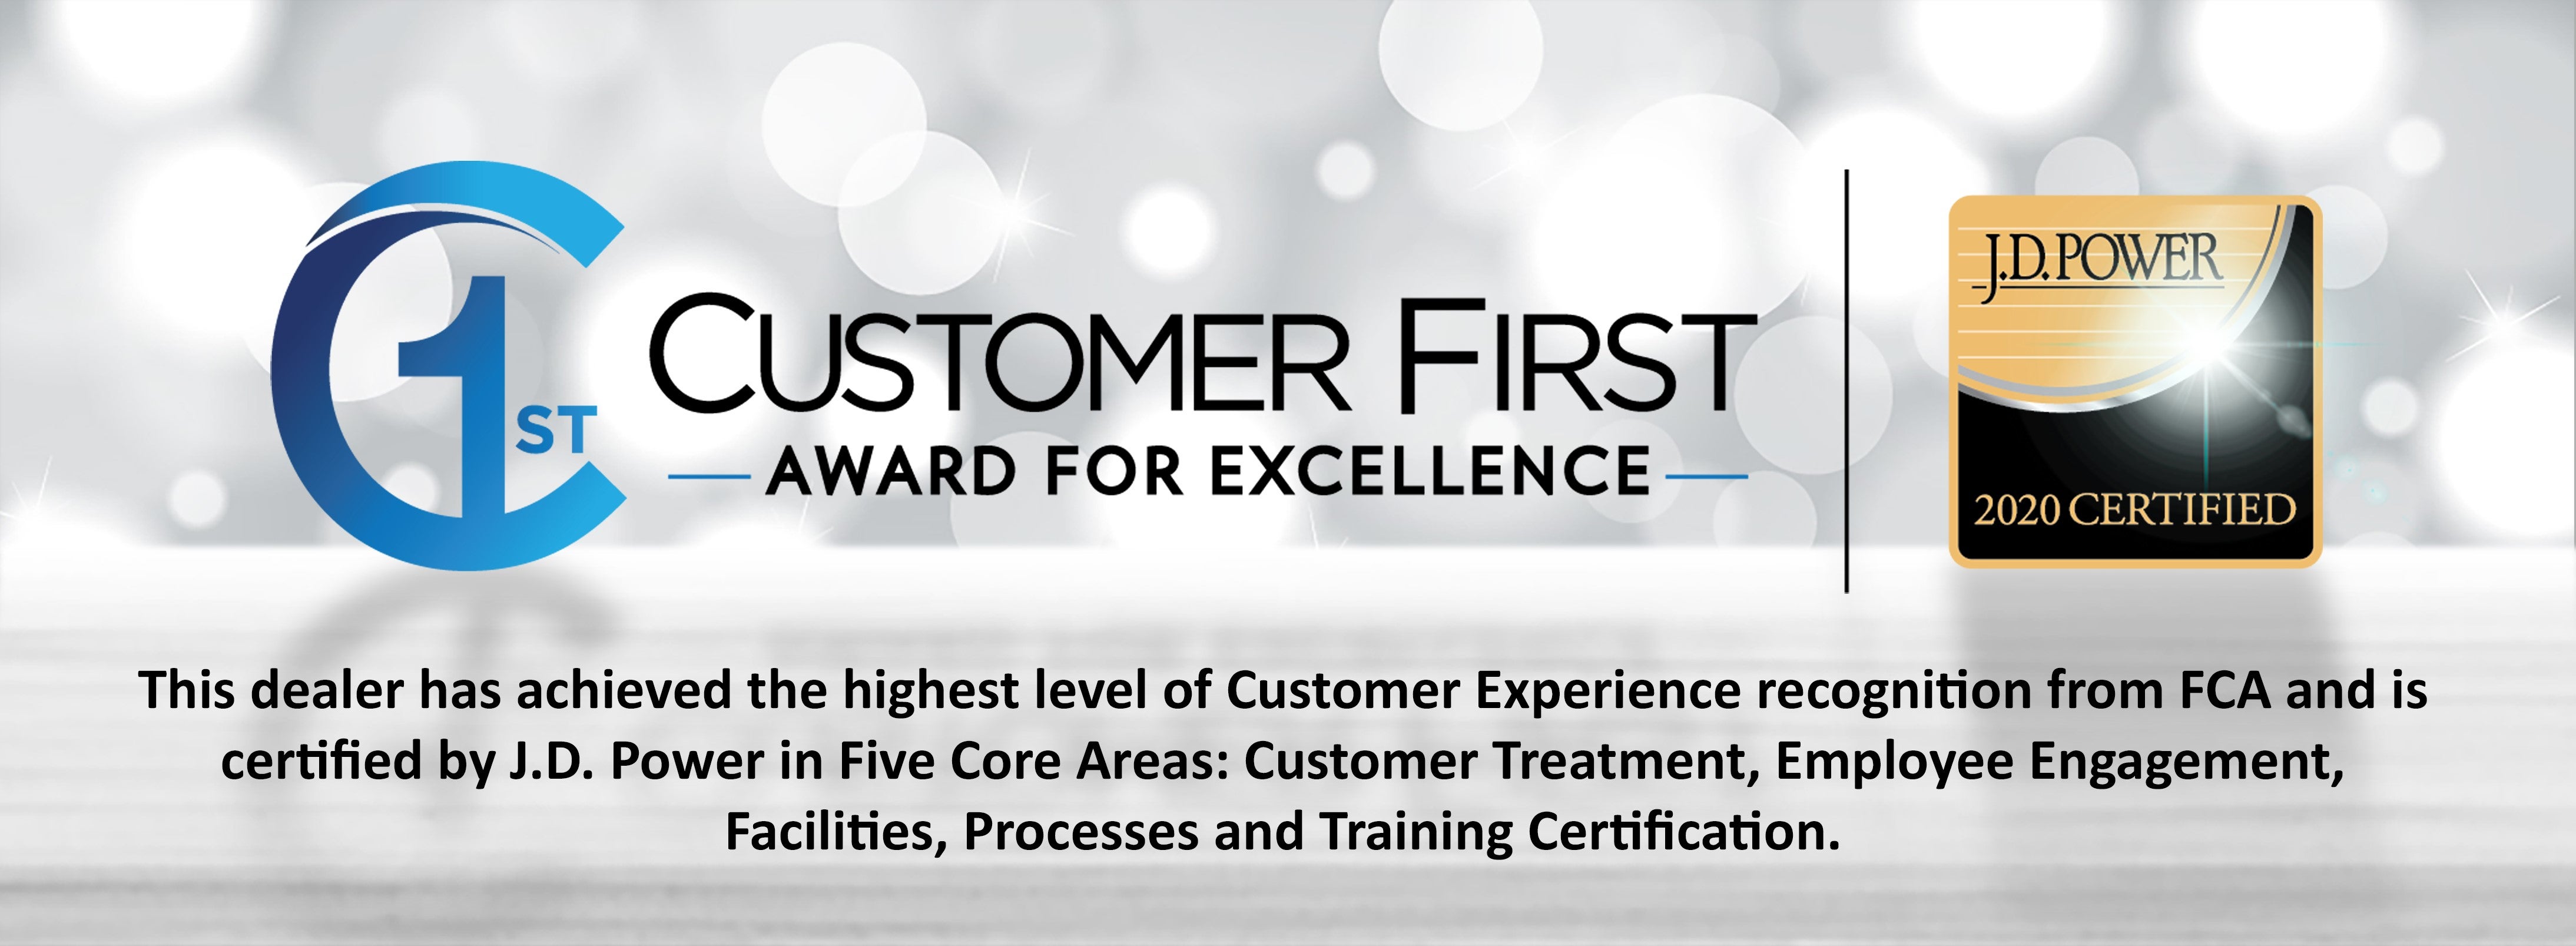 Customer First Award for Excellence for 2019 at V & H Automotive CDJR in Marshfield, WI